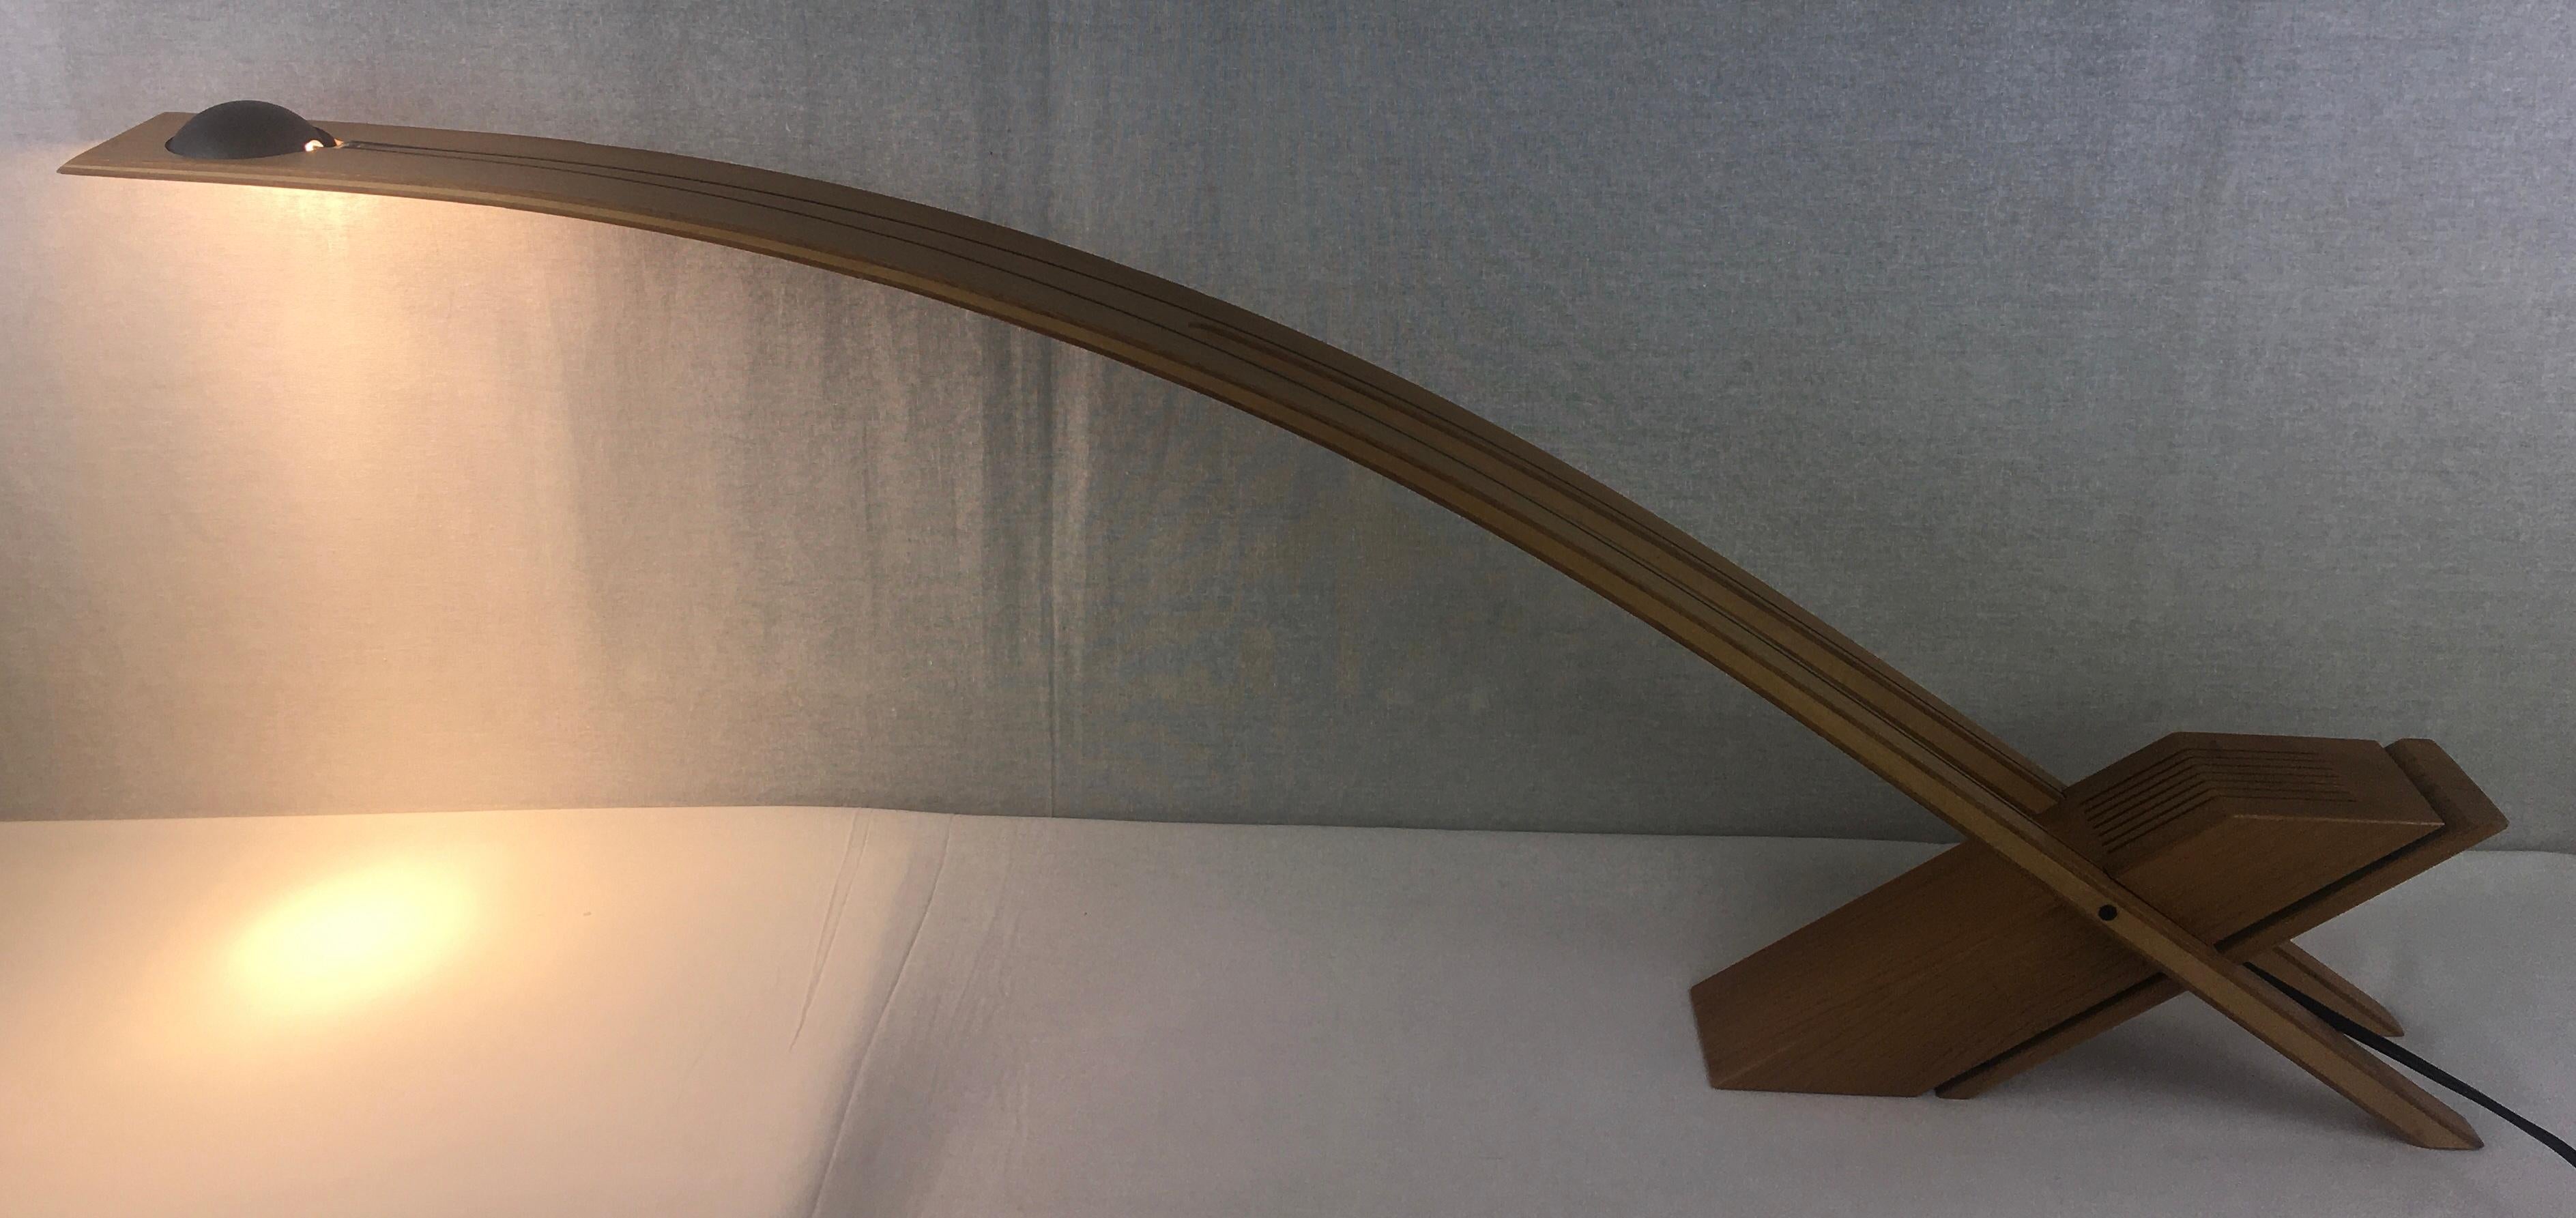 A very practical table or desk lamp in pure organic modern form with a very sleek design, made of solid oak and the arm is constructed with engineered wood. 

Signed by the artist, unknown.  Provenance is France, but, design is perhaps Scandinavian.